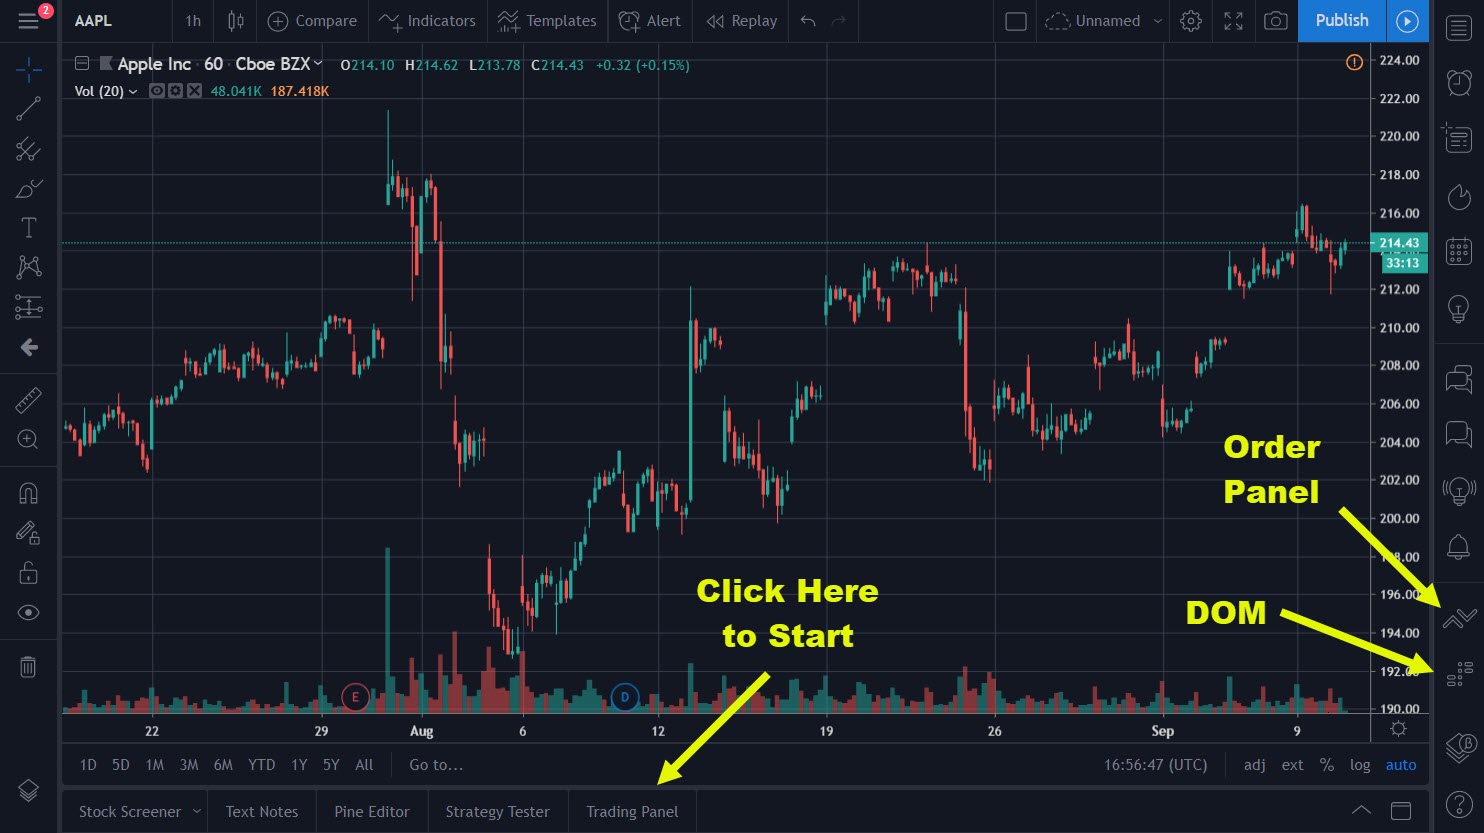 TradeStation Teams up with TradingView, Allowing Orders ...